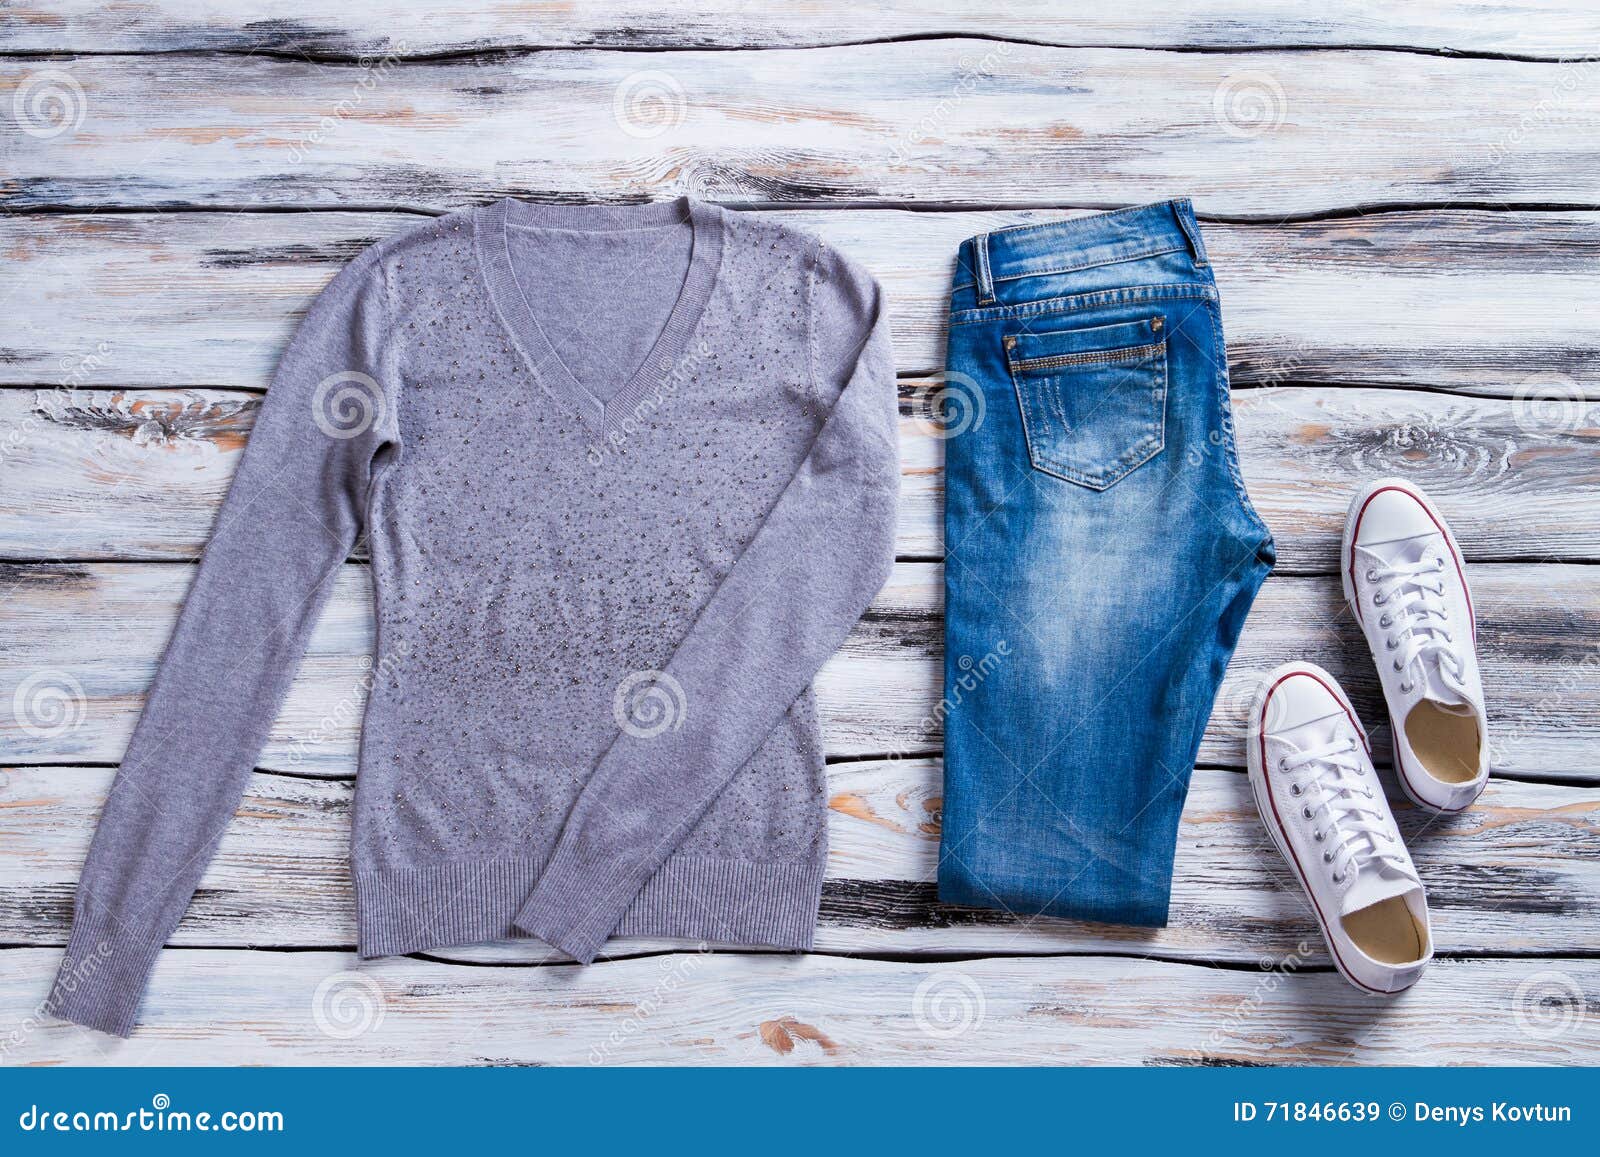 Gray Pullover and Blue Jeans. Stock Image - Image of apparel, floor ...